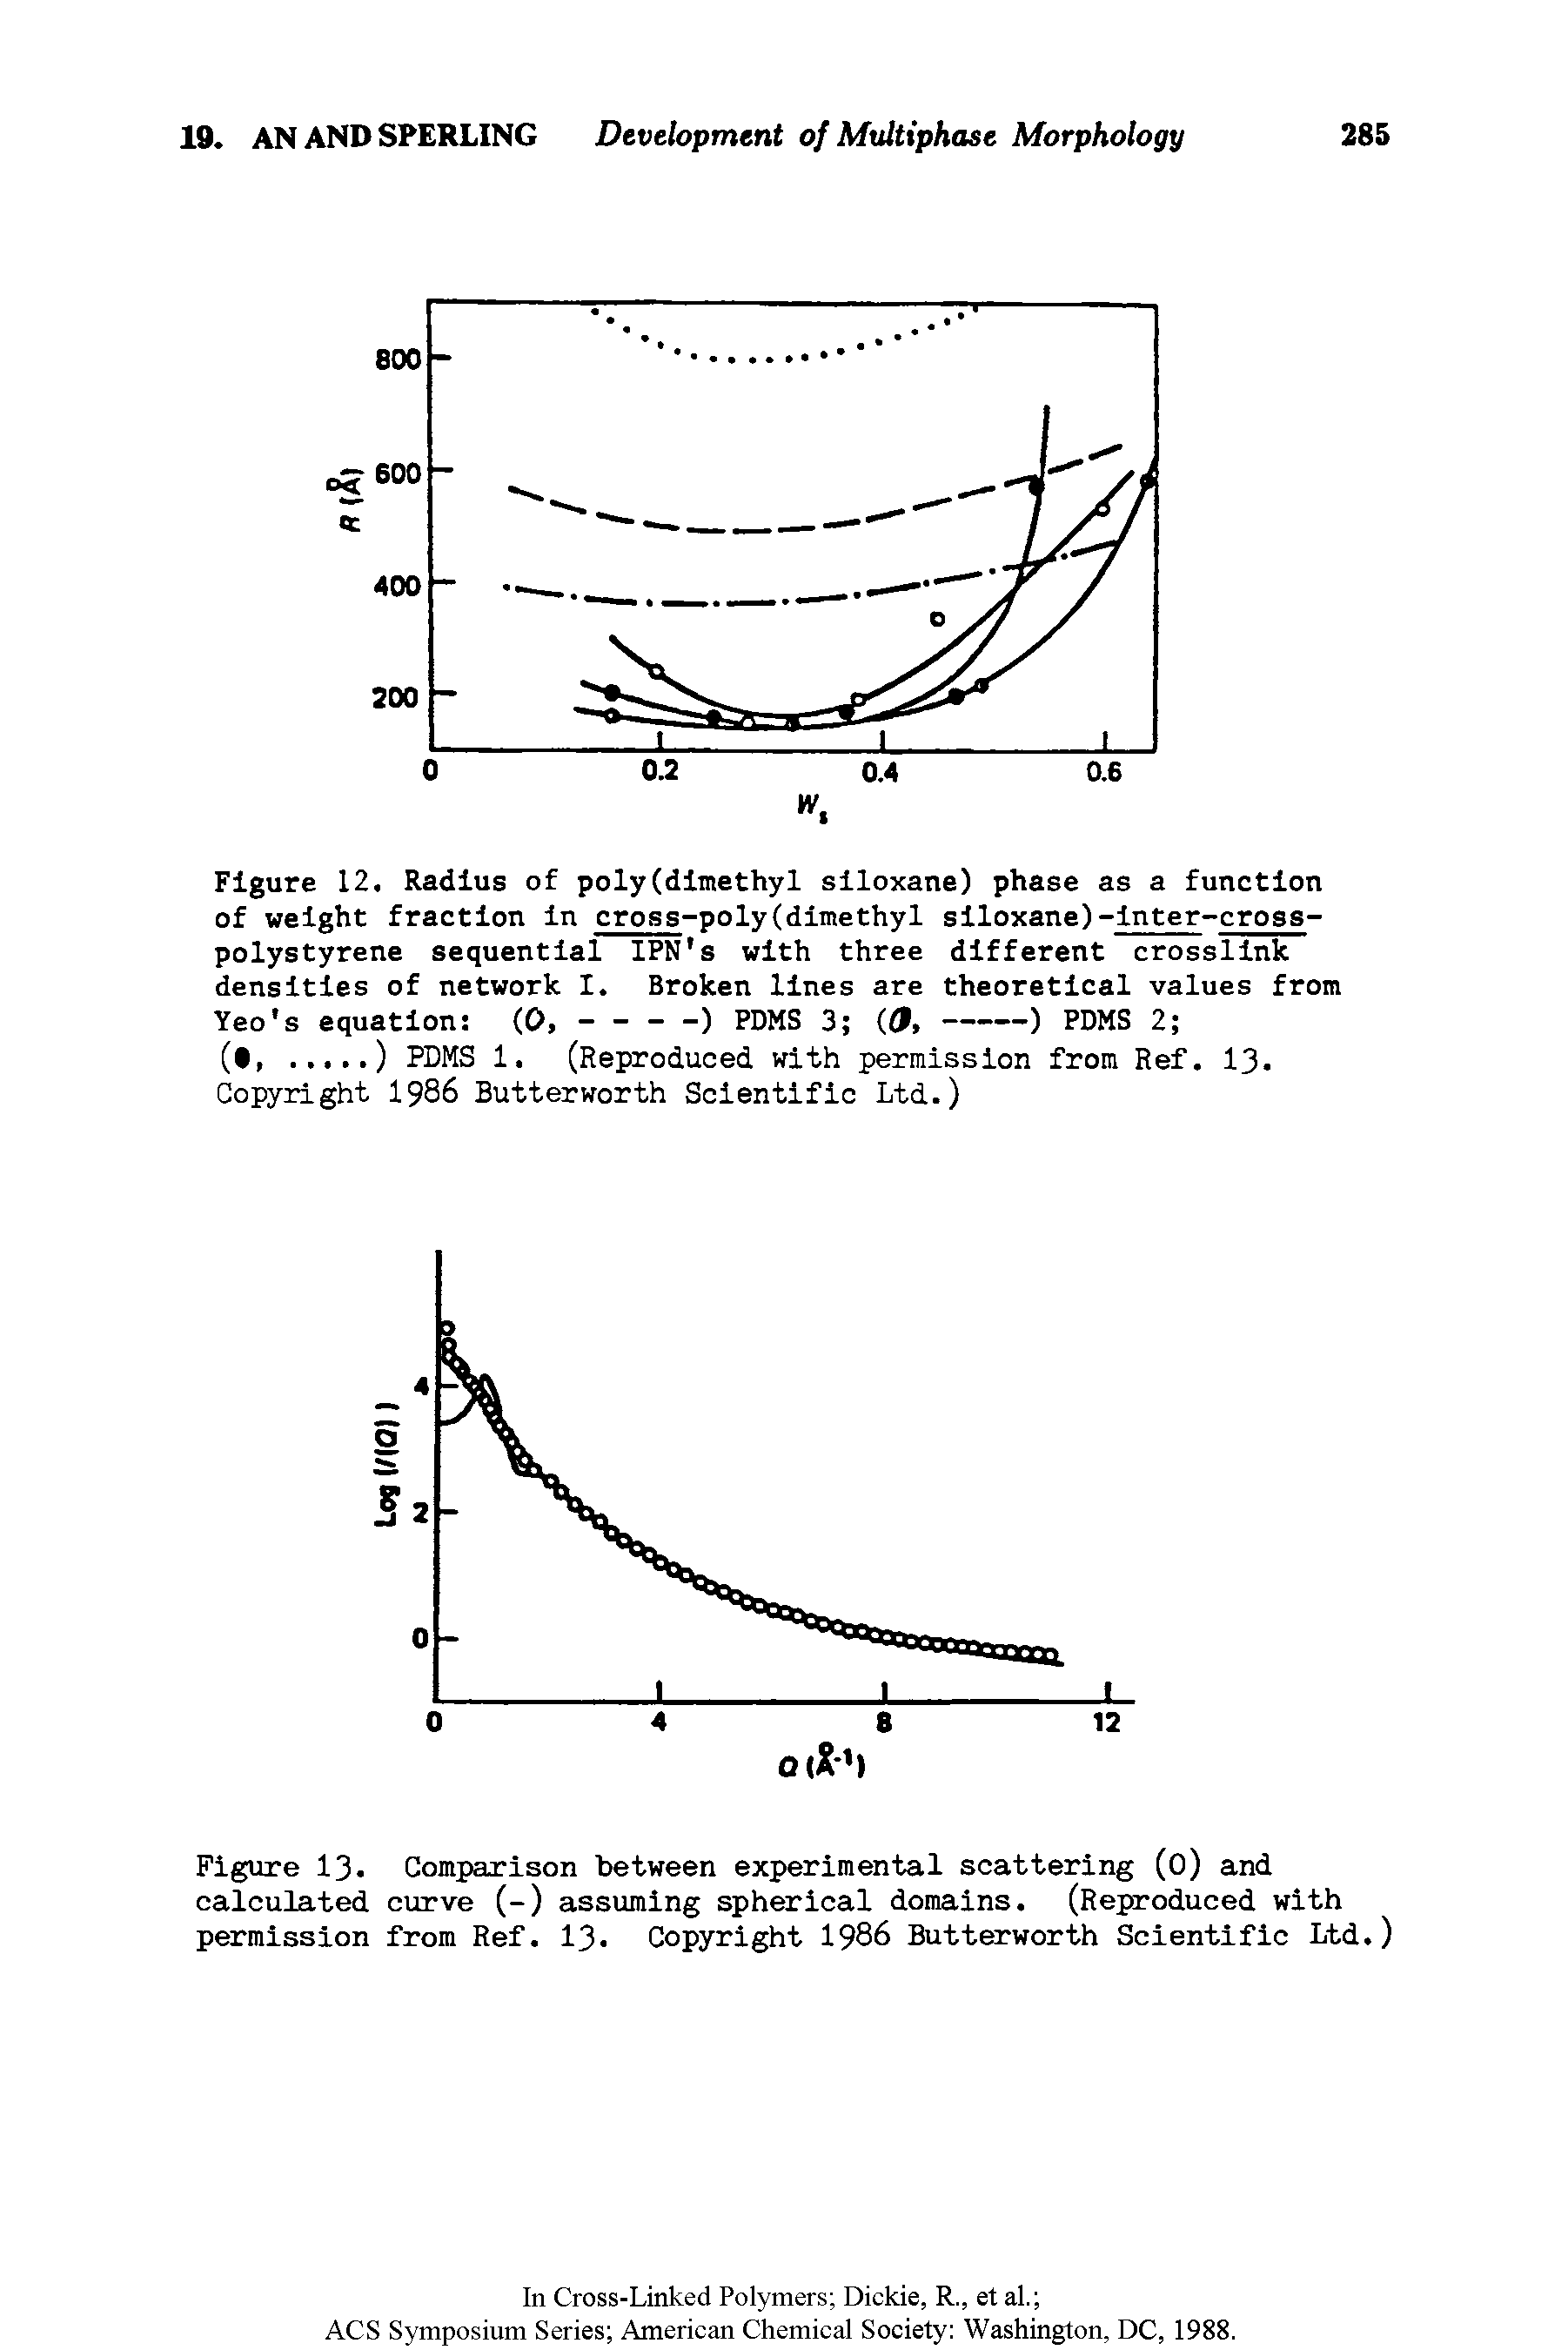 Figure 13. Comparison between experimental scattering (O) and calculated curve (-) assuming spherical domains. (Reproduced with permission from Ref. 13. Copyright 1986 Butterworth Scientific Ltd.)...